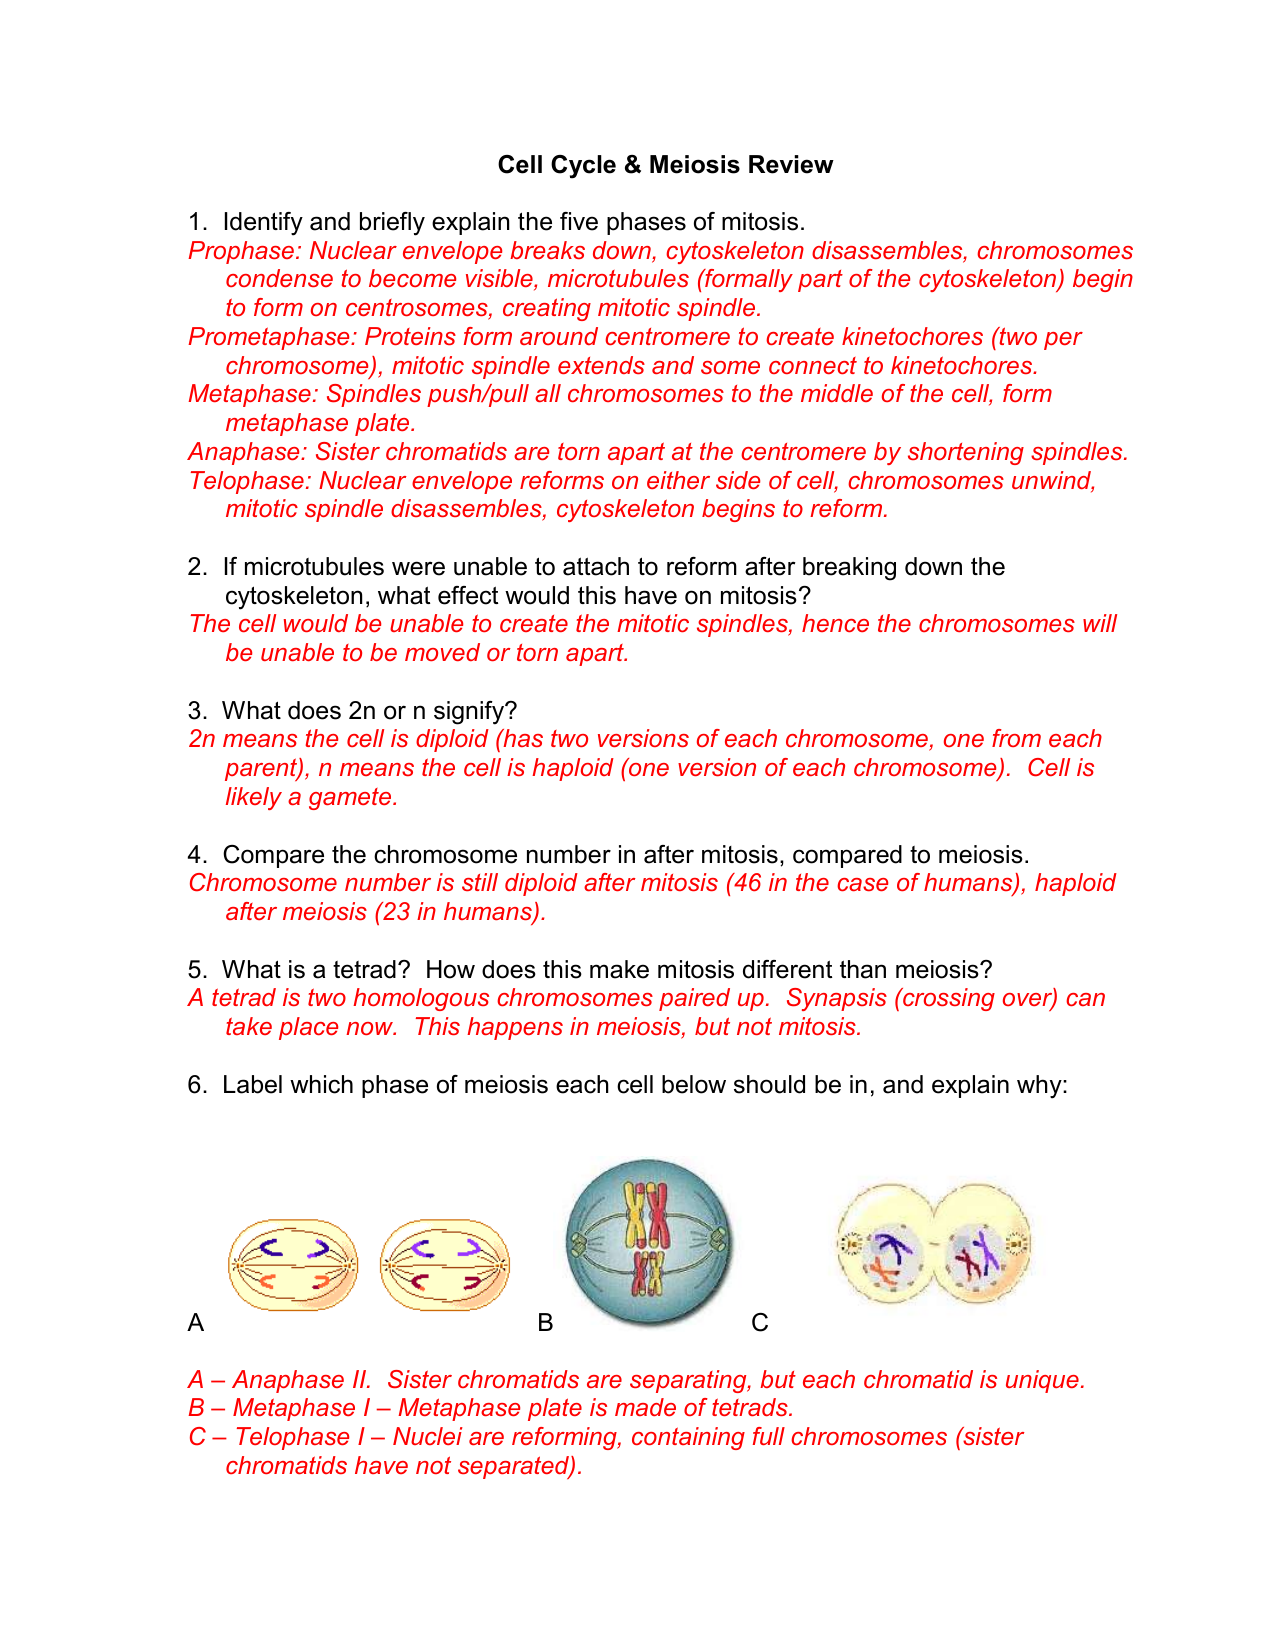 mitosis-and-meiosis-worksheet-answers